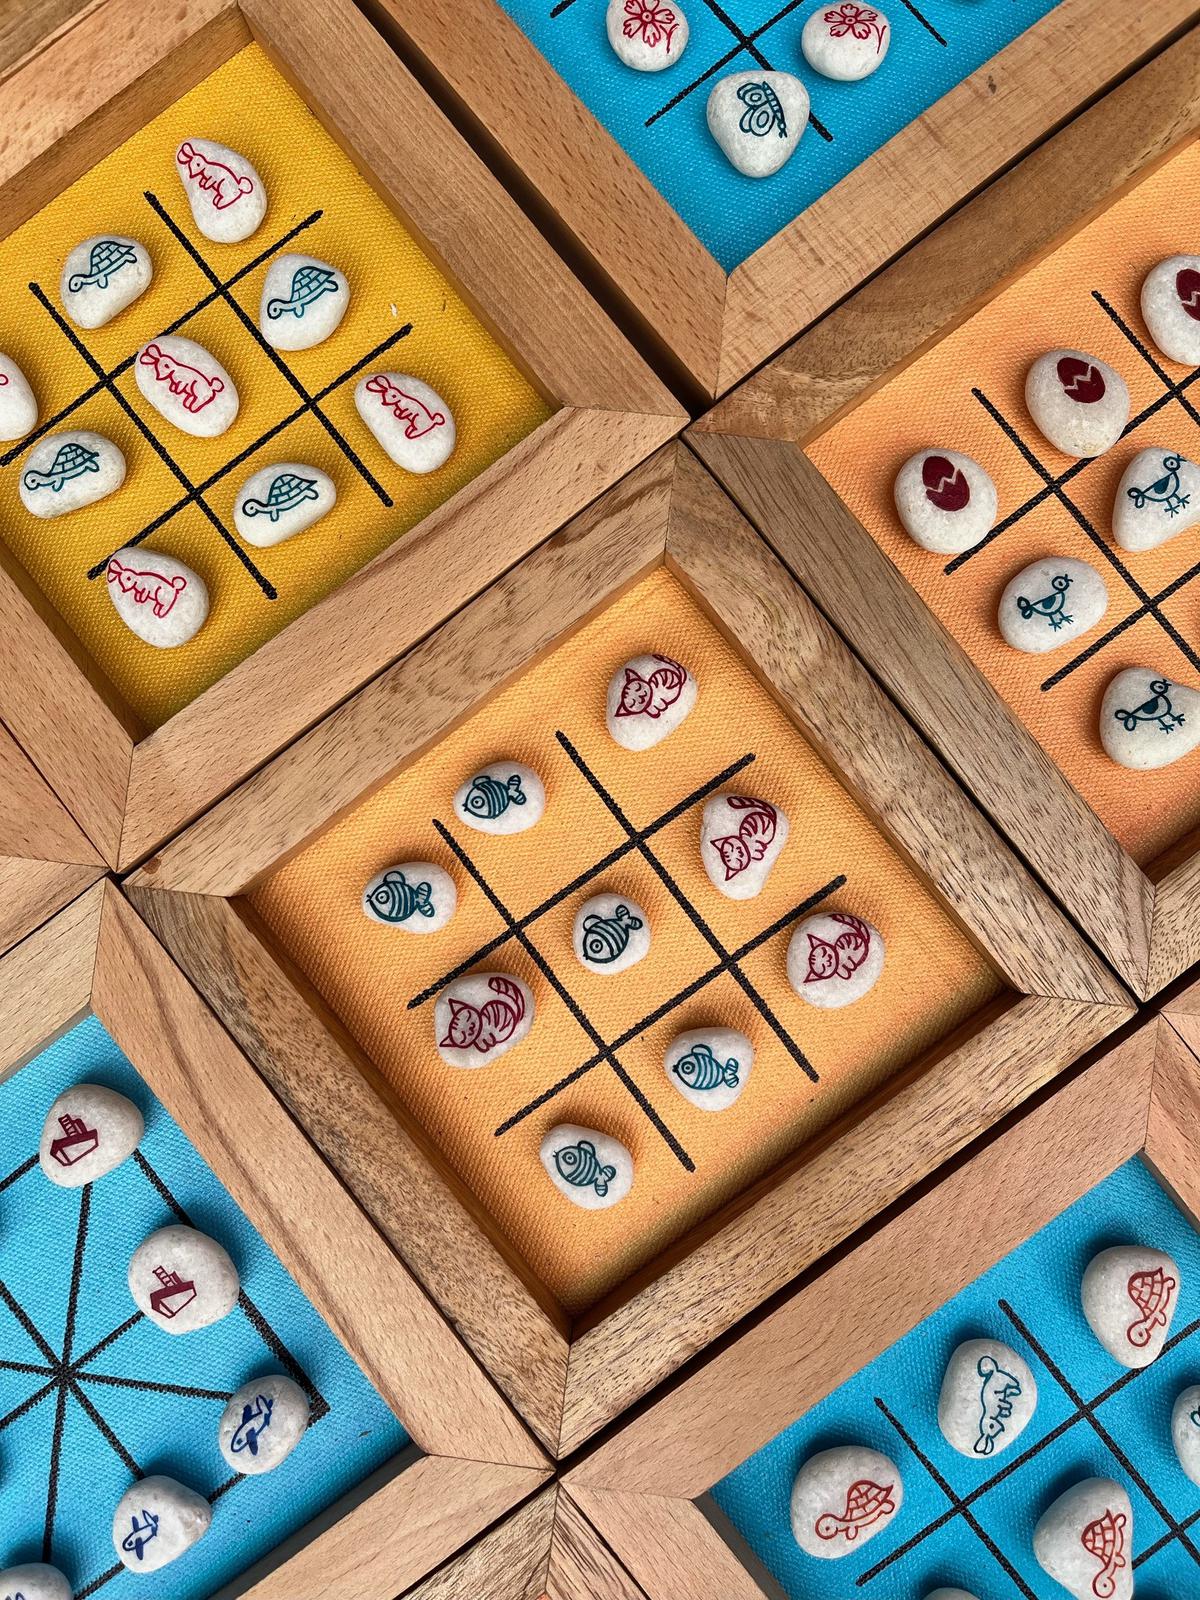 Board game with hand painted stone coins